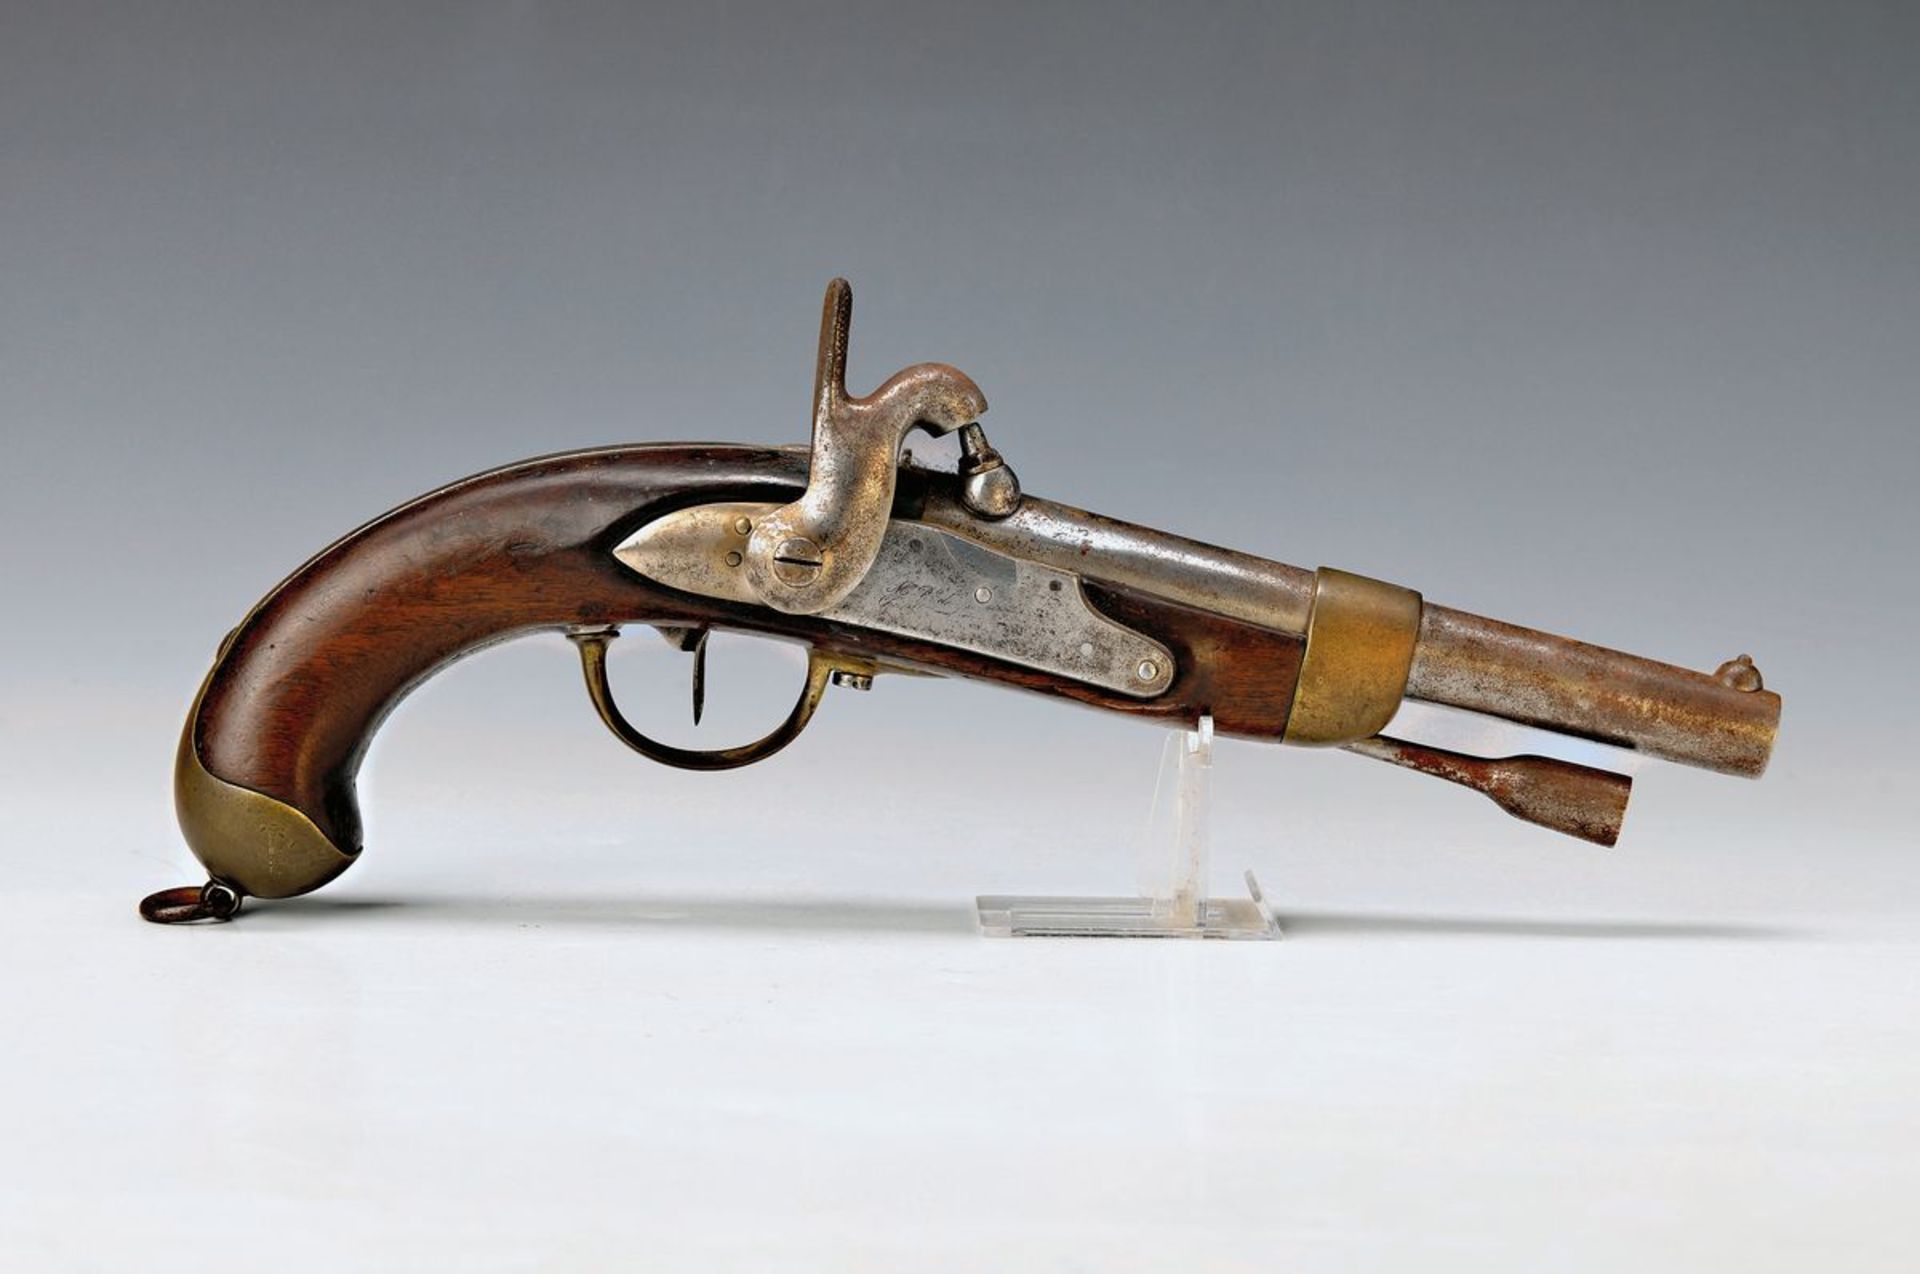 French Percussion Pistol, around 1822, lock plate with illegible engraving, rebuilt Flintlock on